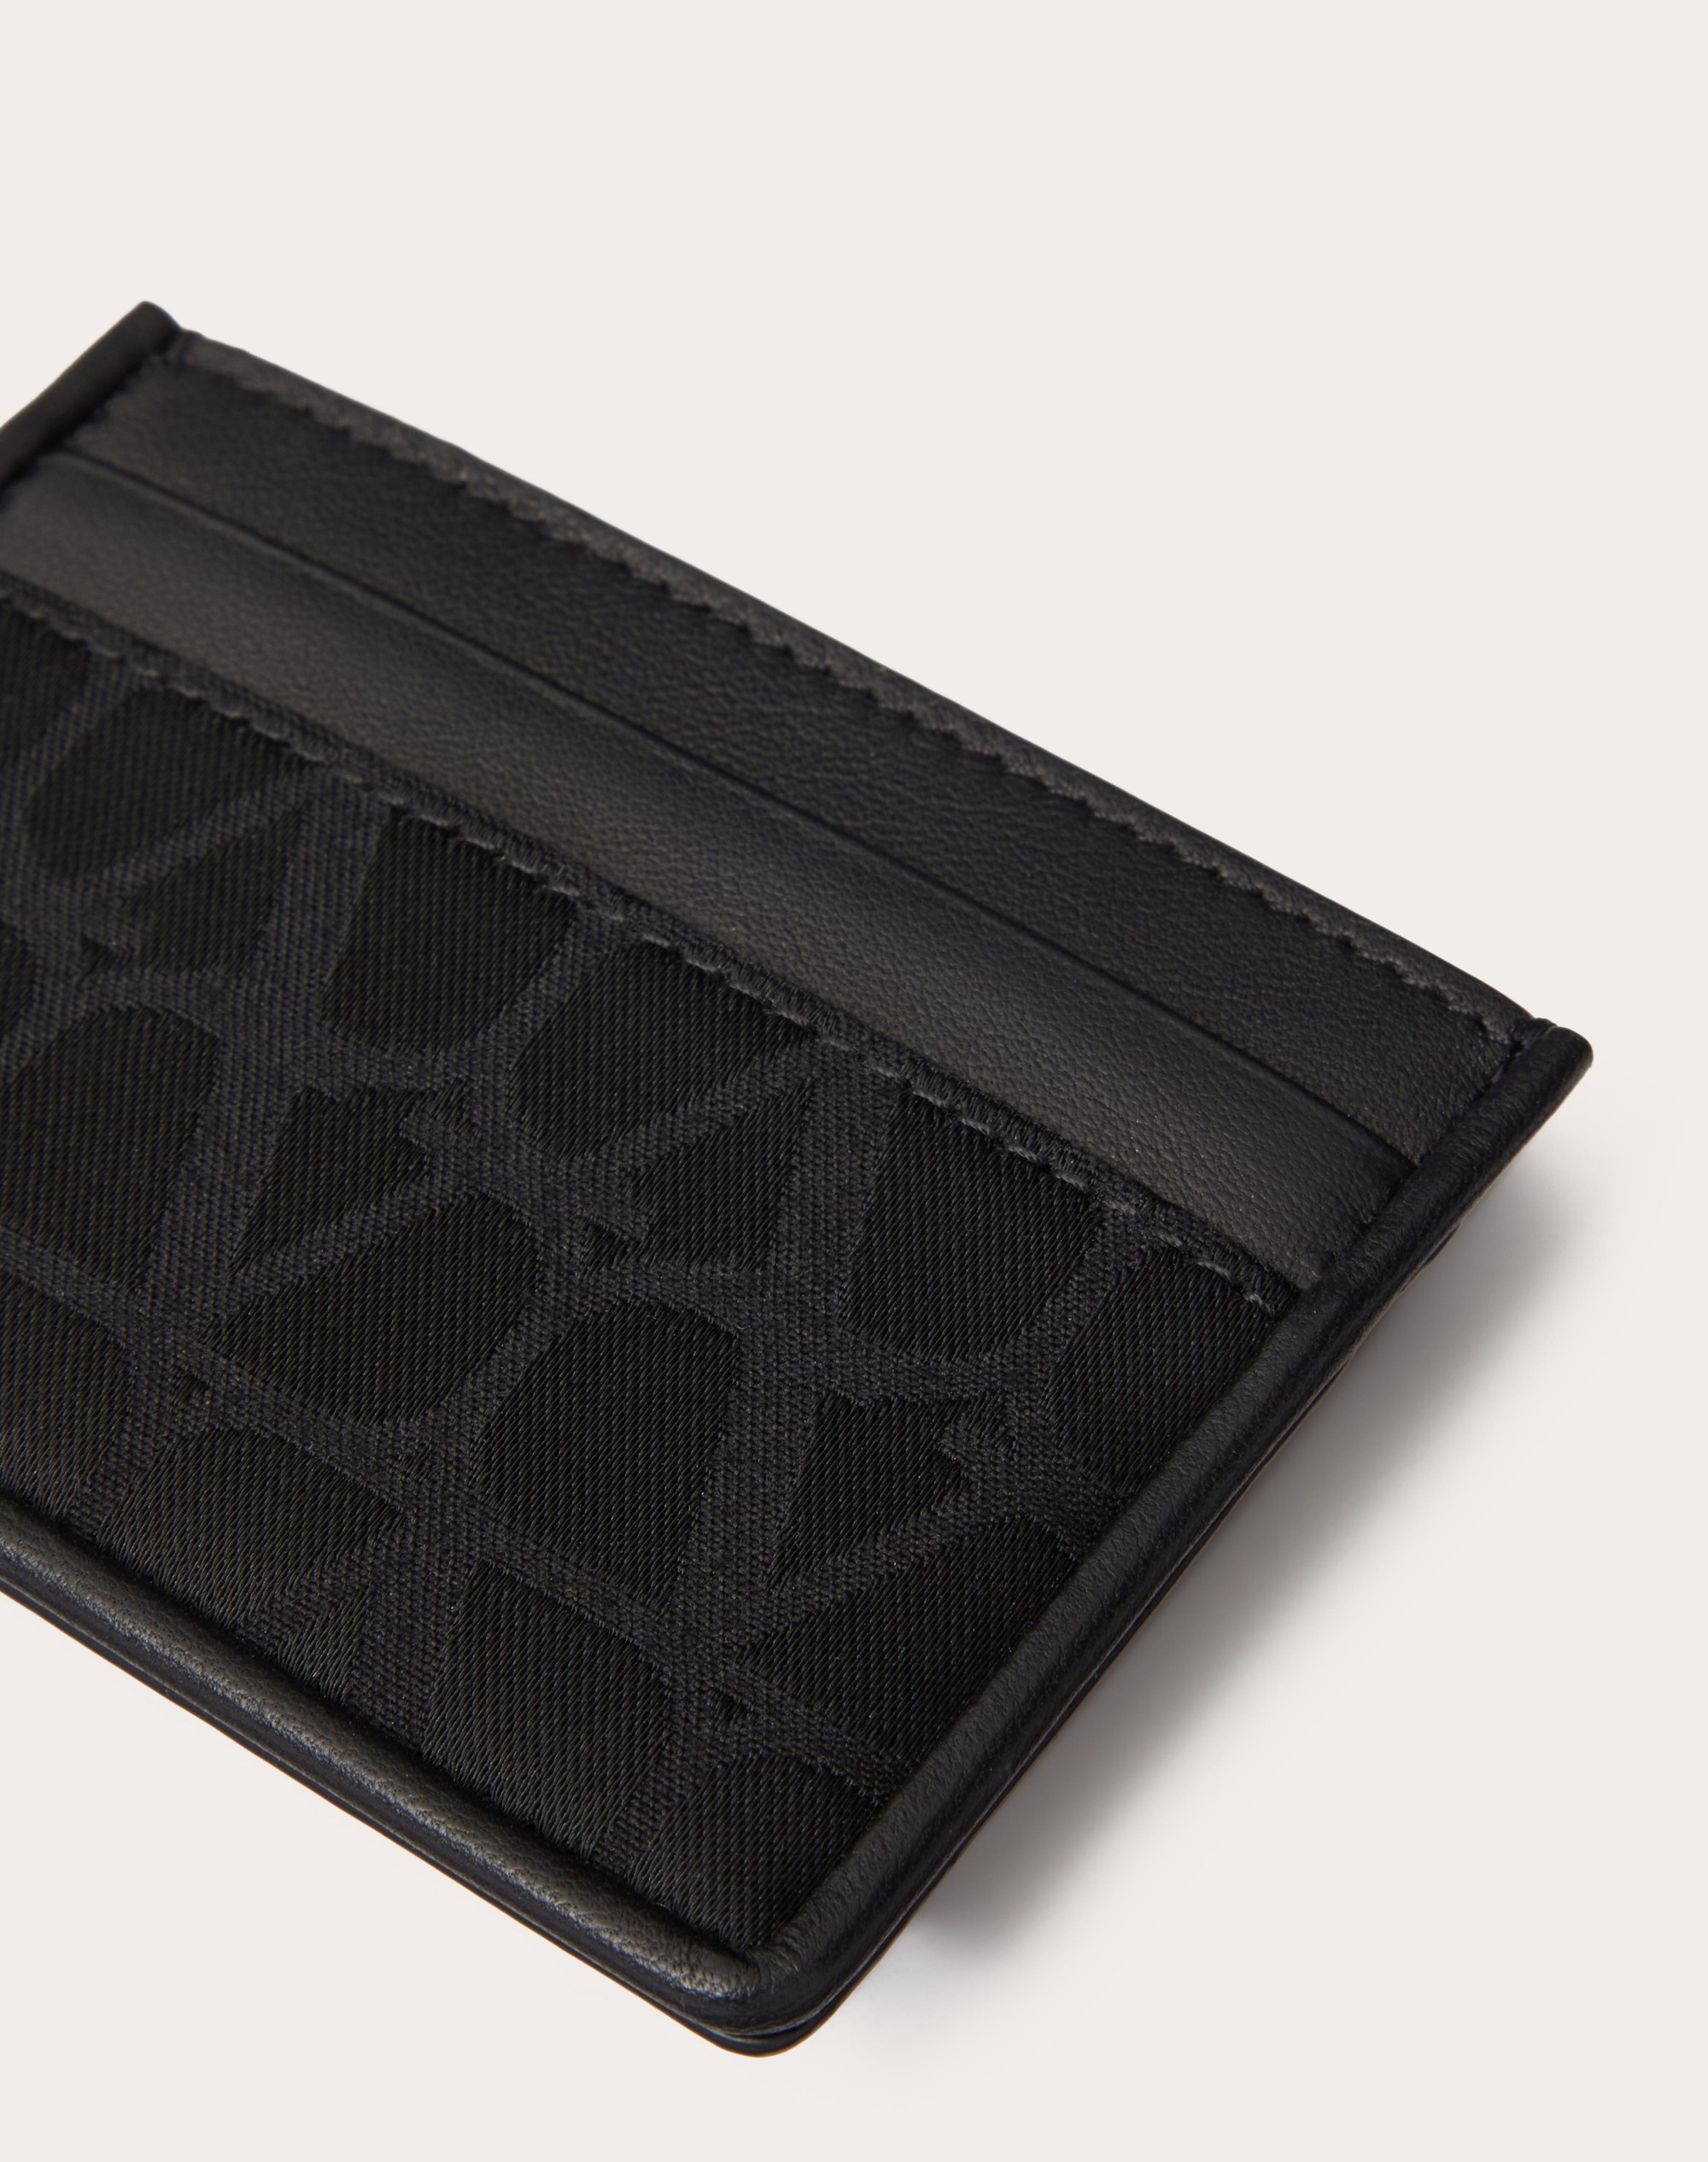 TOILE ICONOGRAPHE CARD HOLDER IN TECHNICAL FABRIC WITH LEATHER DETAILS - 2